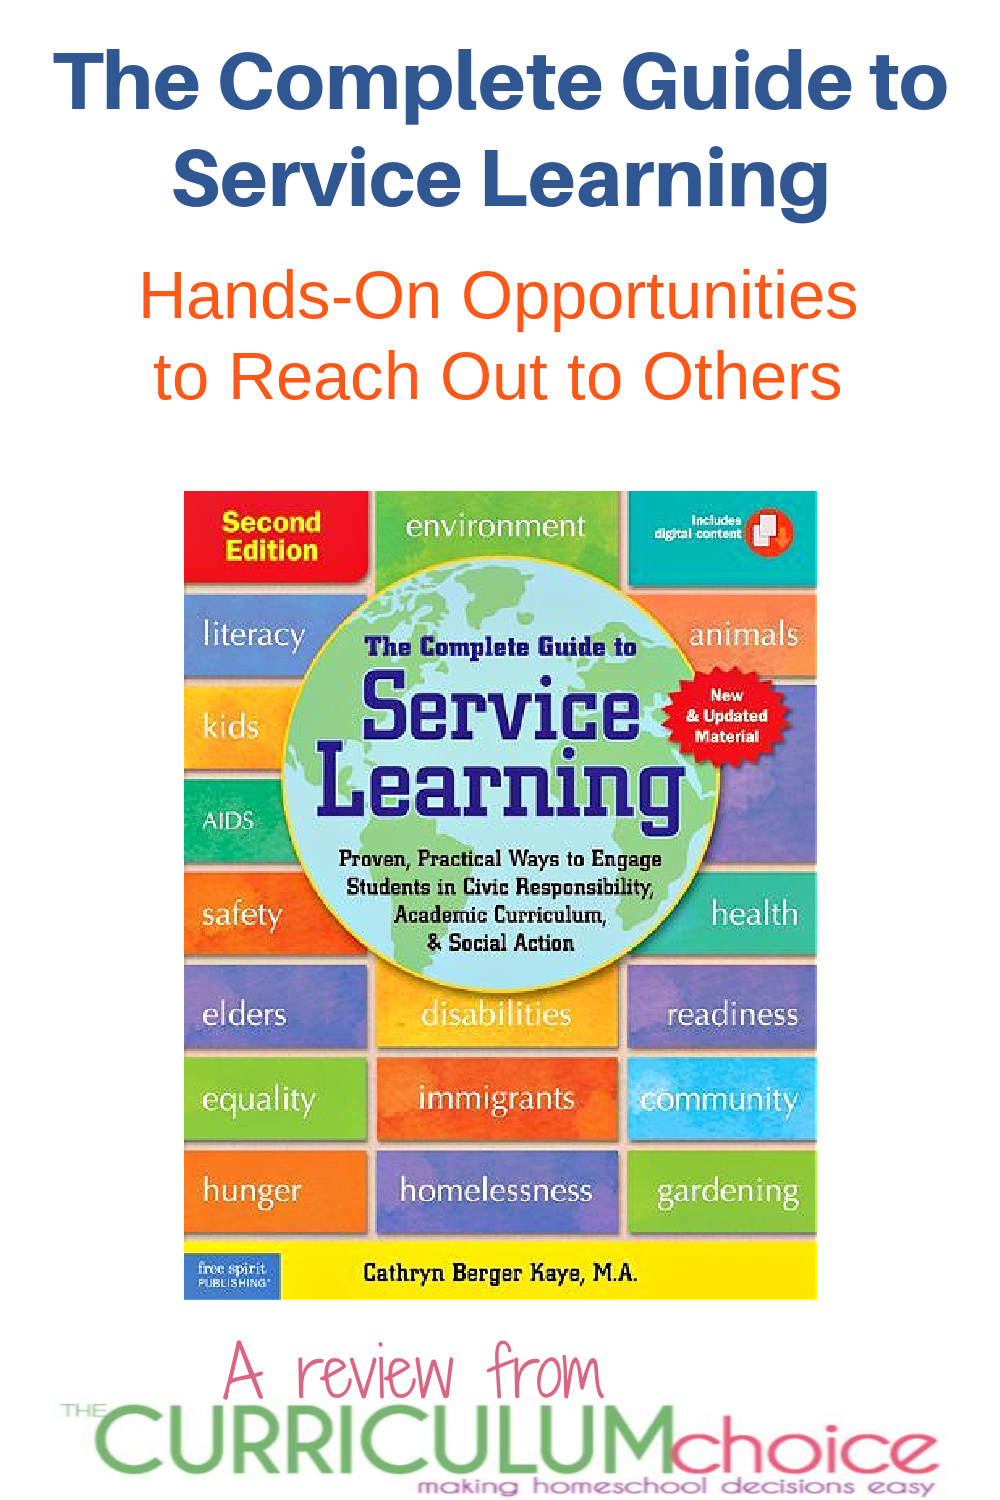 The Complete Guide to Service Learning - Hands-On Opportunities to Reach Out to Others. A book to help your family construct a life of service